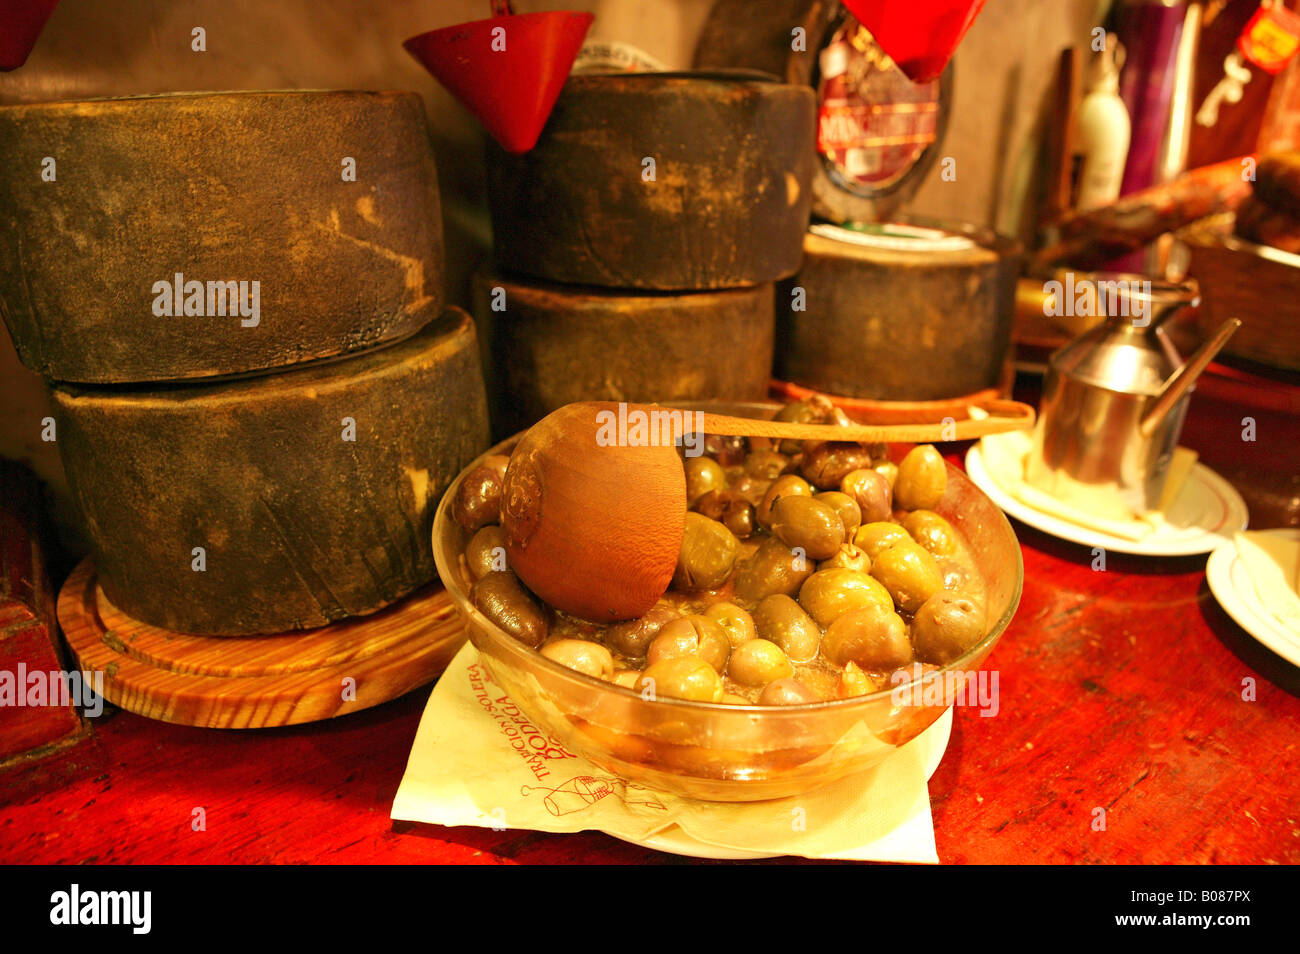 Kaese und Oliven, cheese and olives Stock Photo